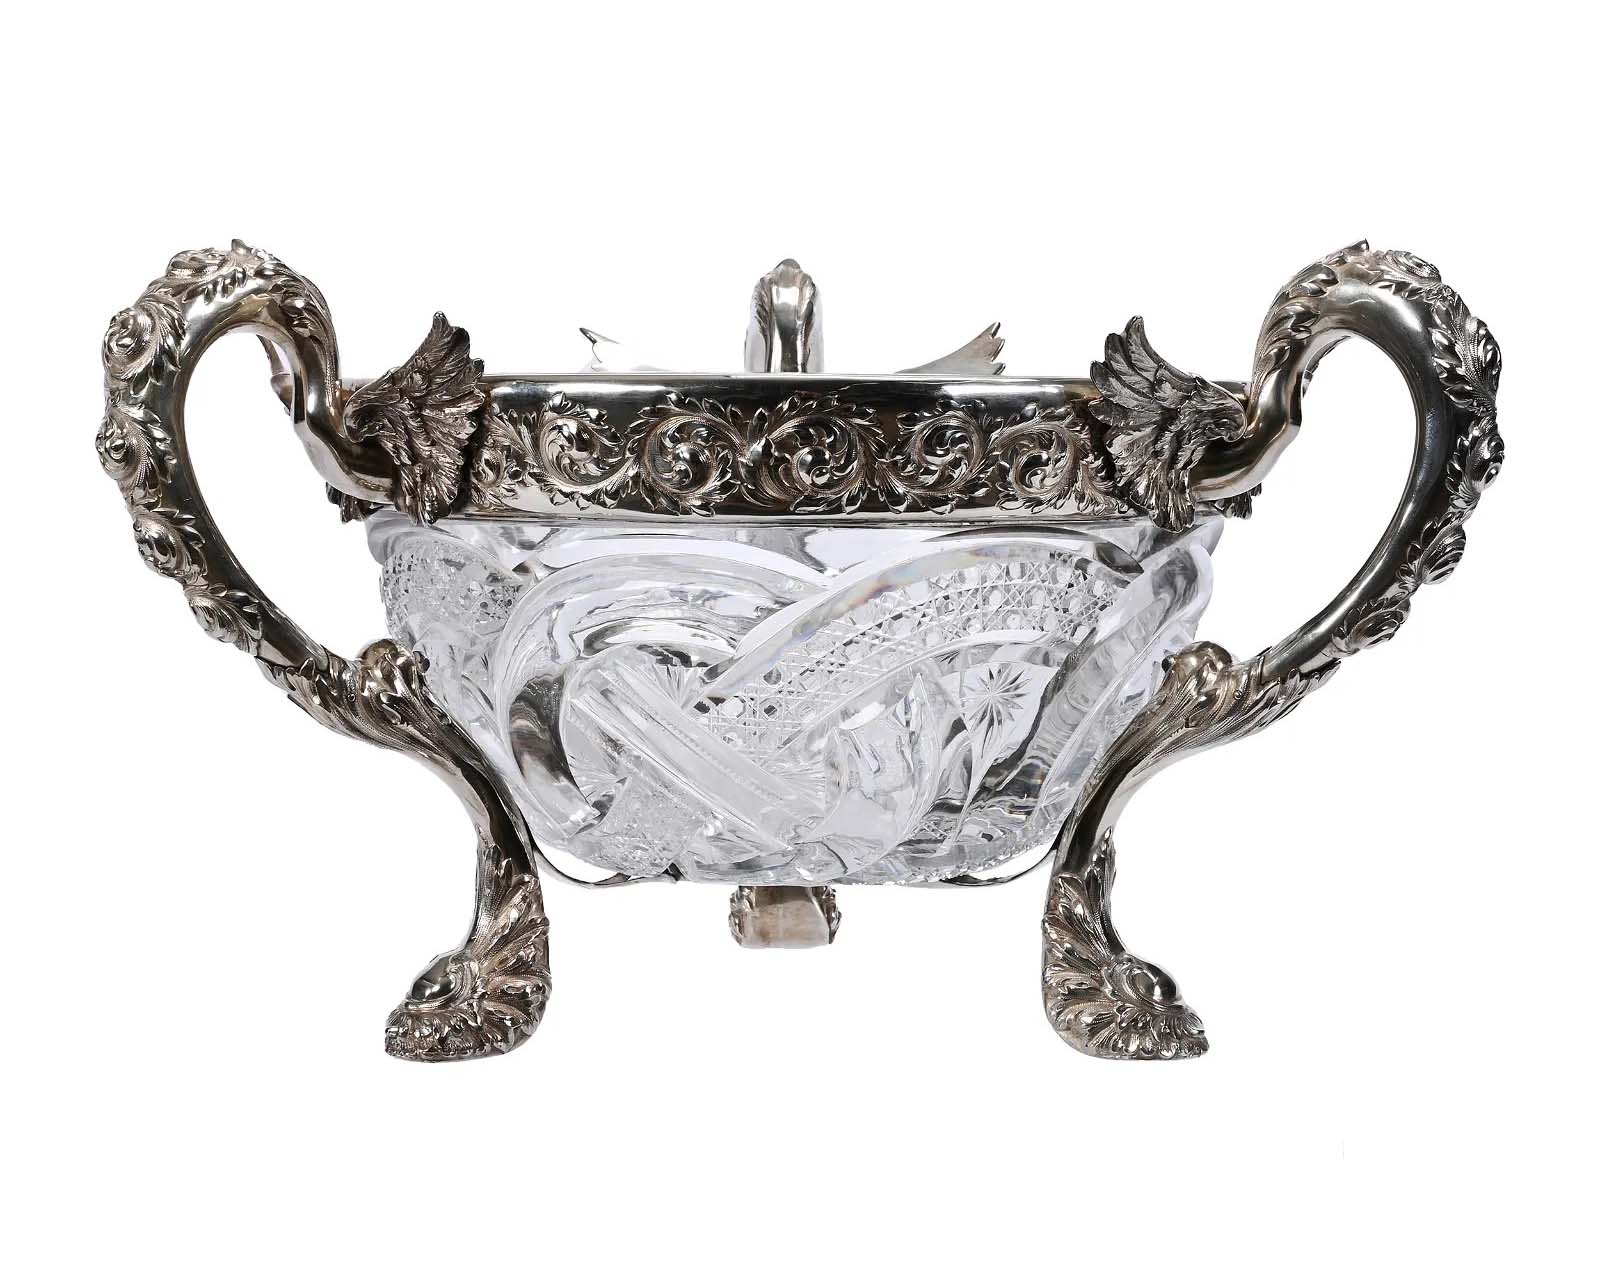 J. Hoare three-handled American brilliant cut glass centerpiece with sterling silver mounts, $110,000 at Woody Auction. The winner looks to be a LiveAuctioneers bidder, and 86 people were watching the sale.